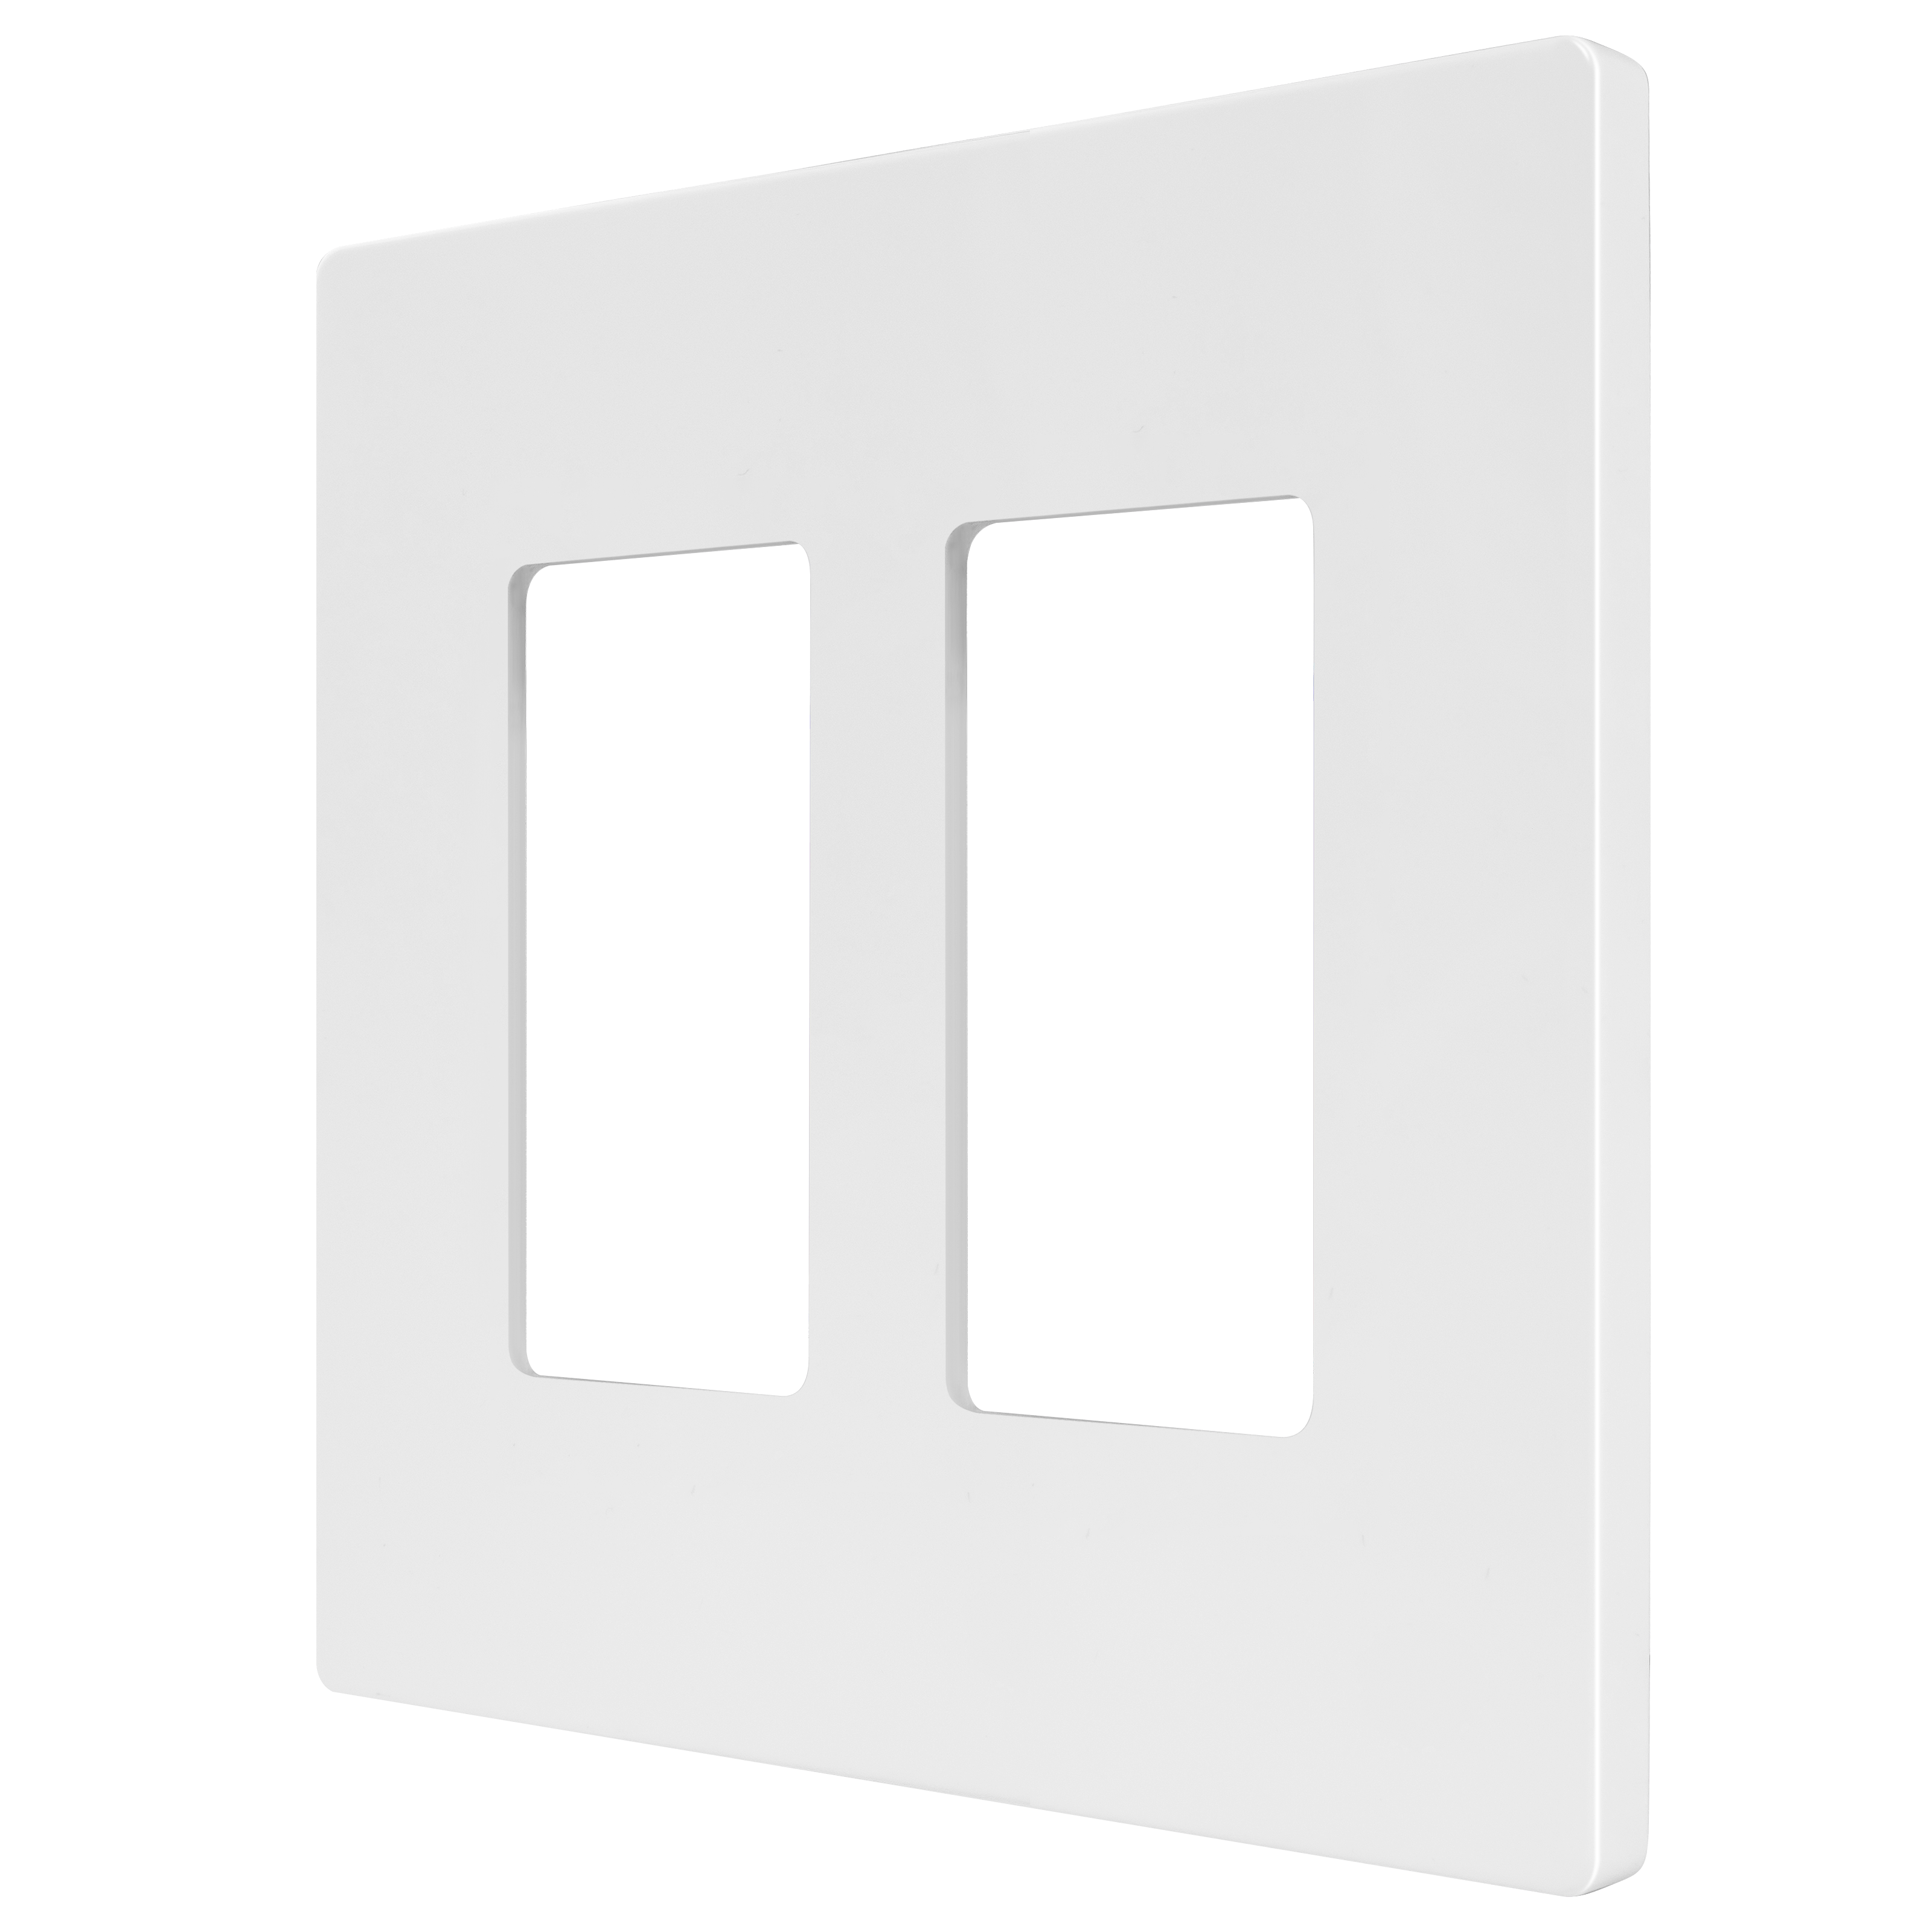 Rêve Collection Luxury Double Decorator Switch Cover, Screwless Wall Plate